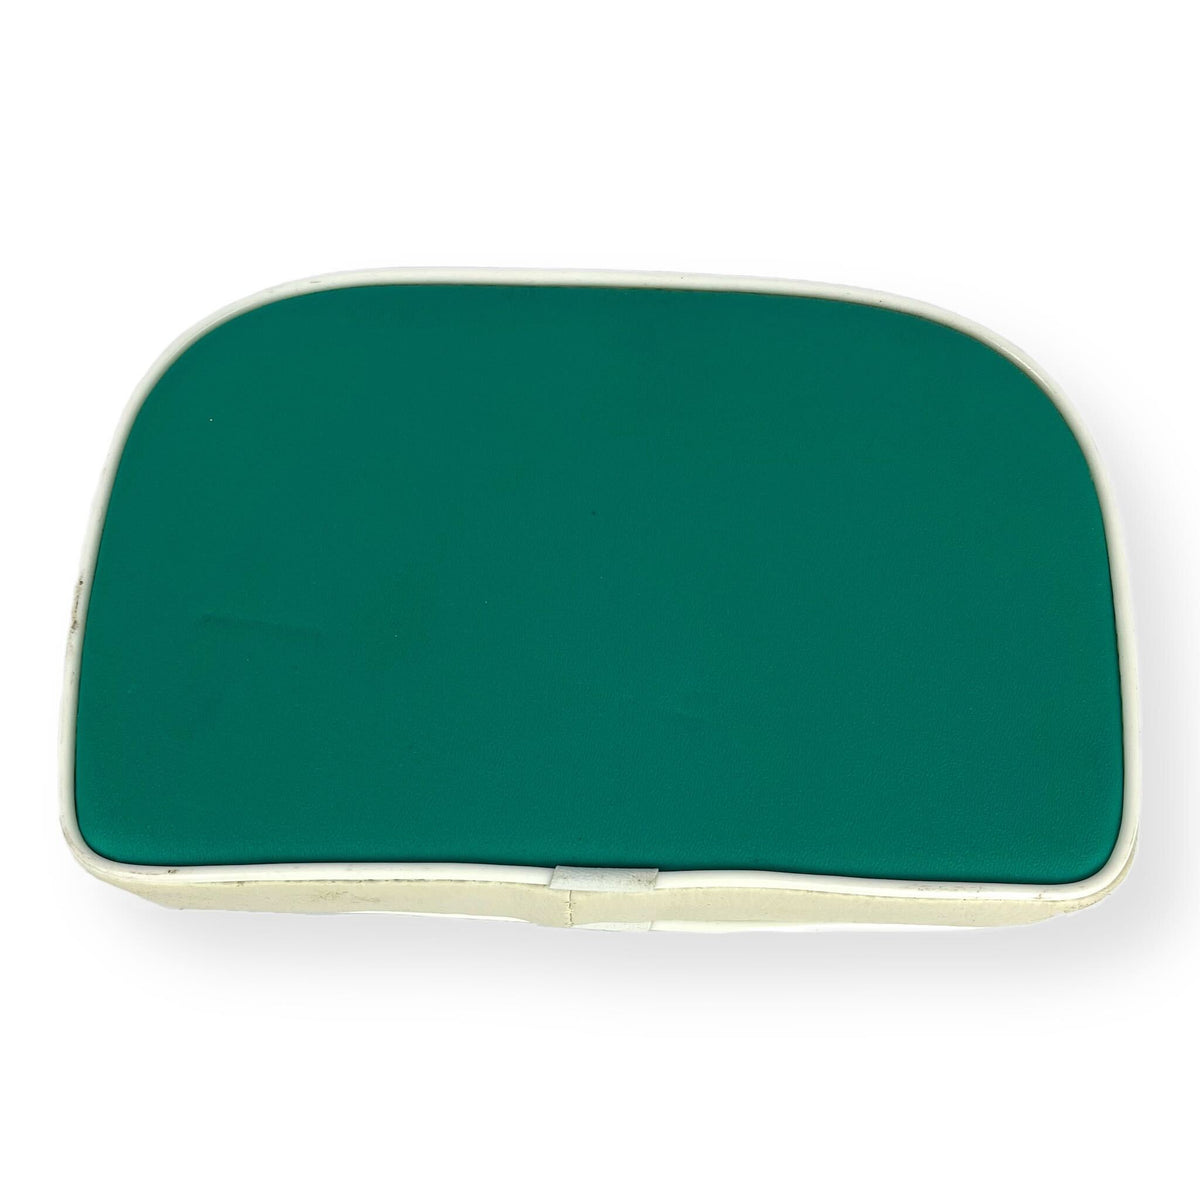 Vespa Lambretta Replacement Backrest Pad For 4 in 1 Stainless Carriers - Forest Green with White Piping